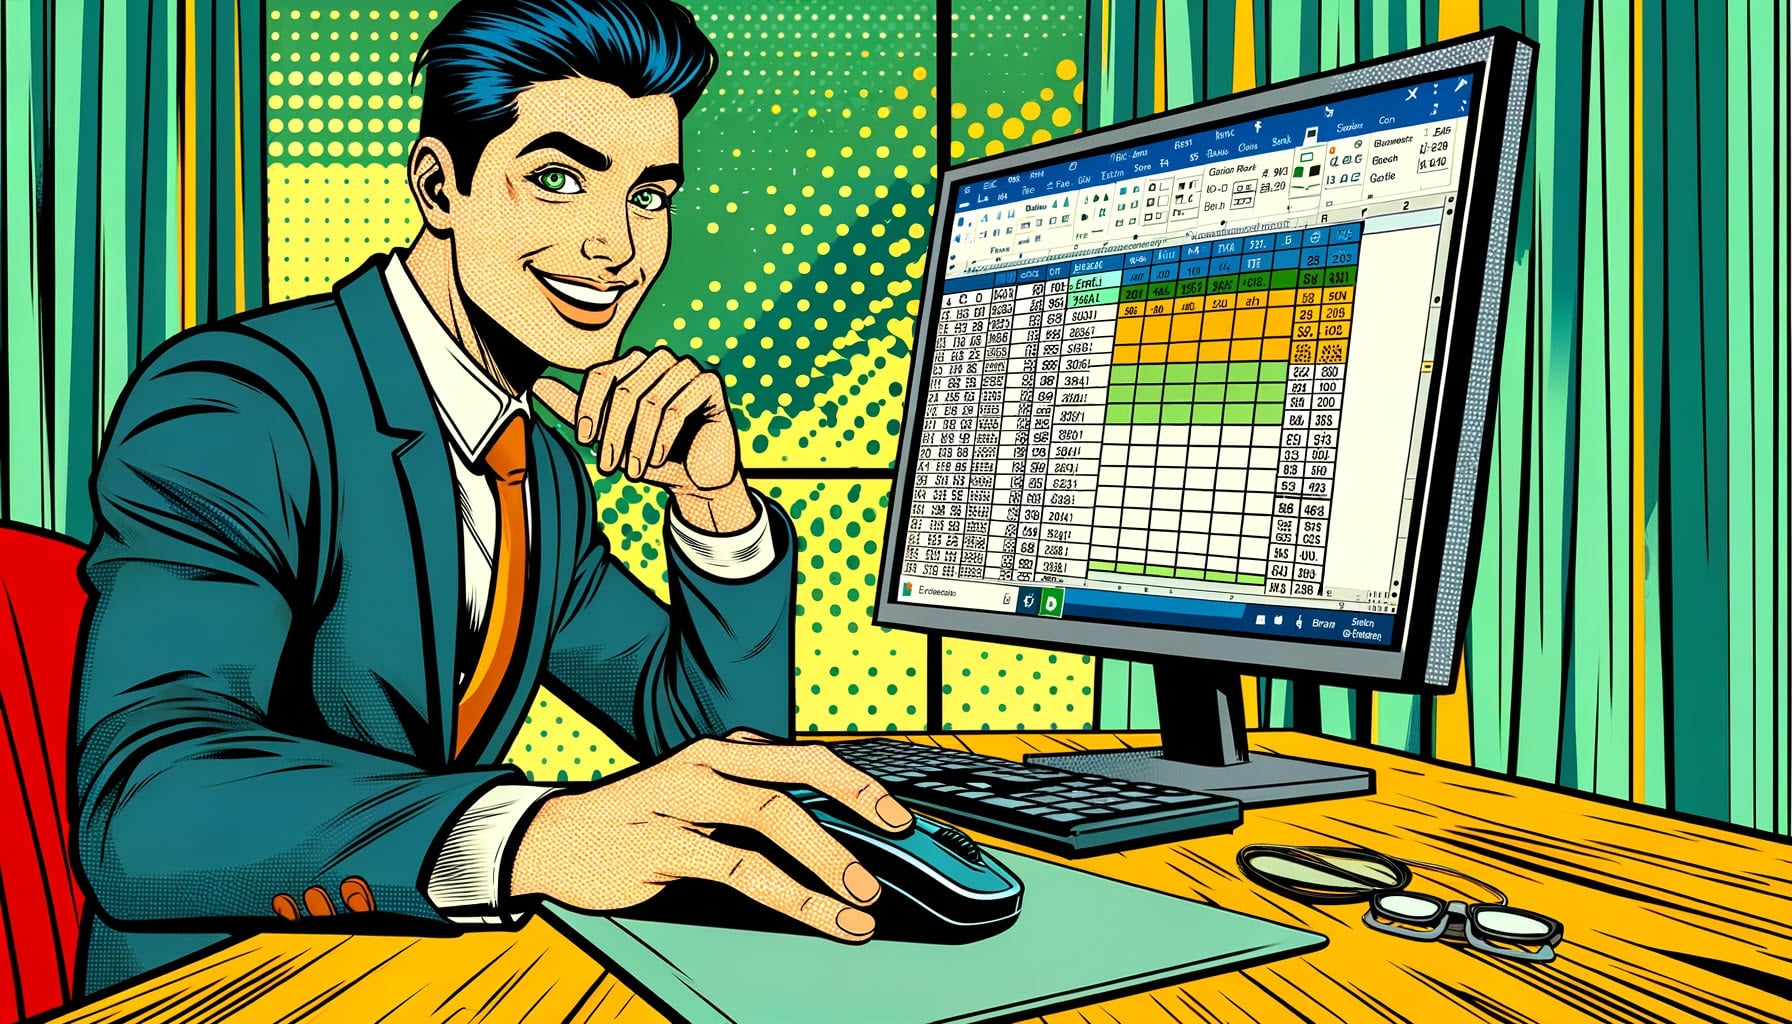 Image shows a vibrant, comic-style, depicting a person in a business environment at their desk with an Excel spreadsheet on the computer. The scene is playful and engaging, designed to emphasize a fun and positive work atmosphere.